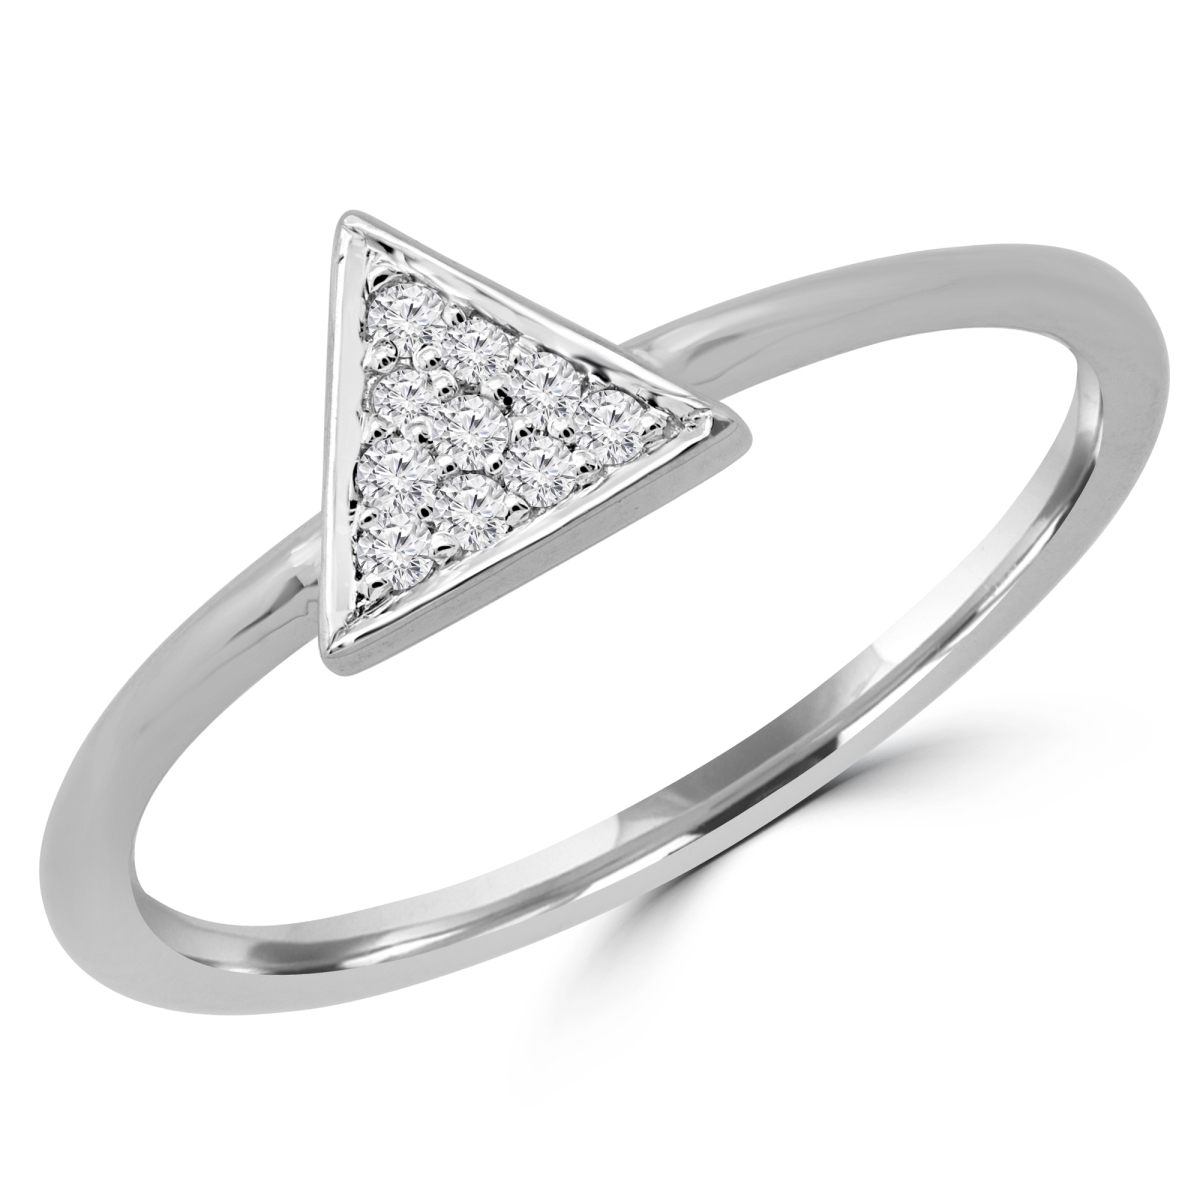 Picture of Majesty Diamonds MDR190069-3 0.1 CTW Round Diamond Triangle Cluster Ring in 14K White Gold - Size 3